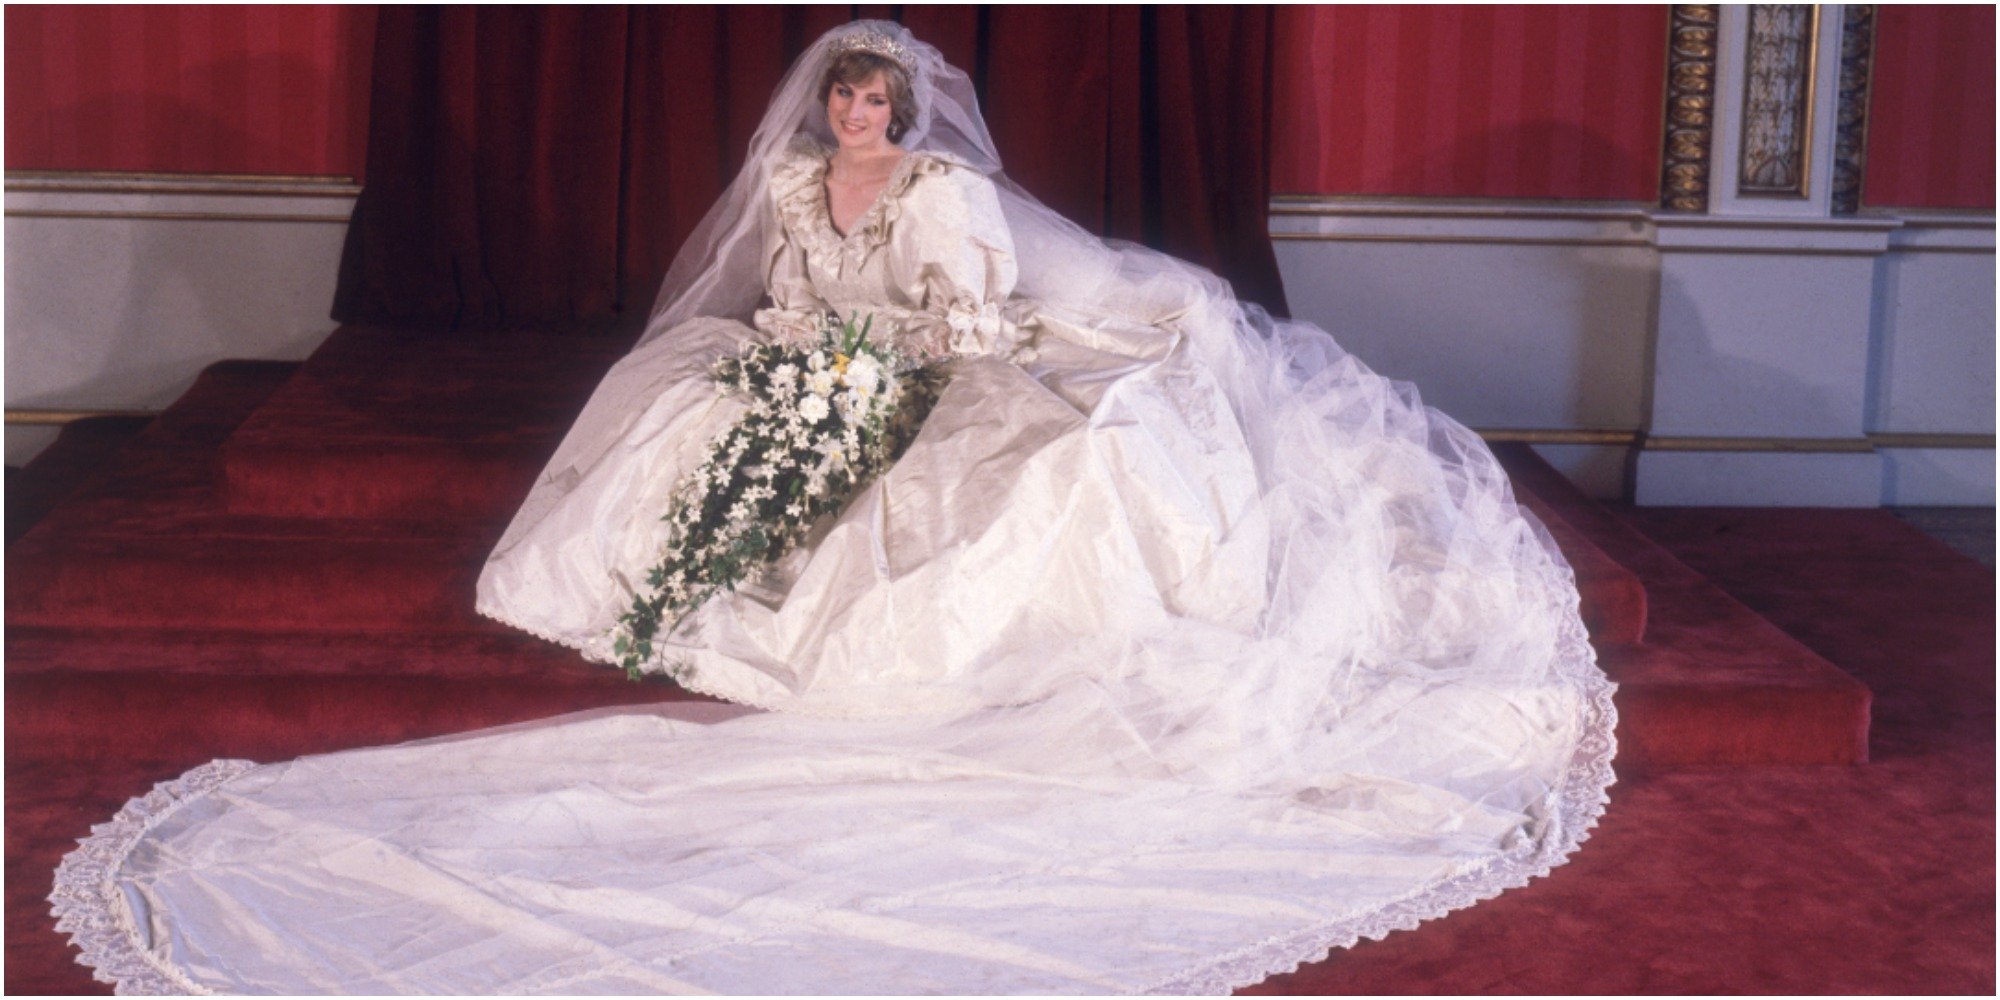 Princess Diana in a solo photo taken on her wedding day July 1981.